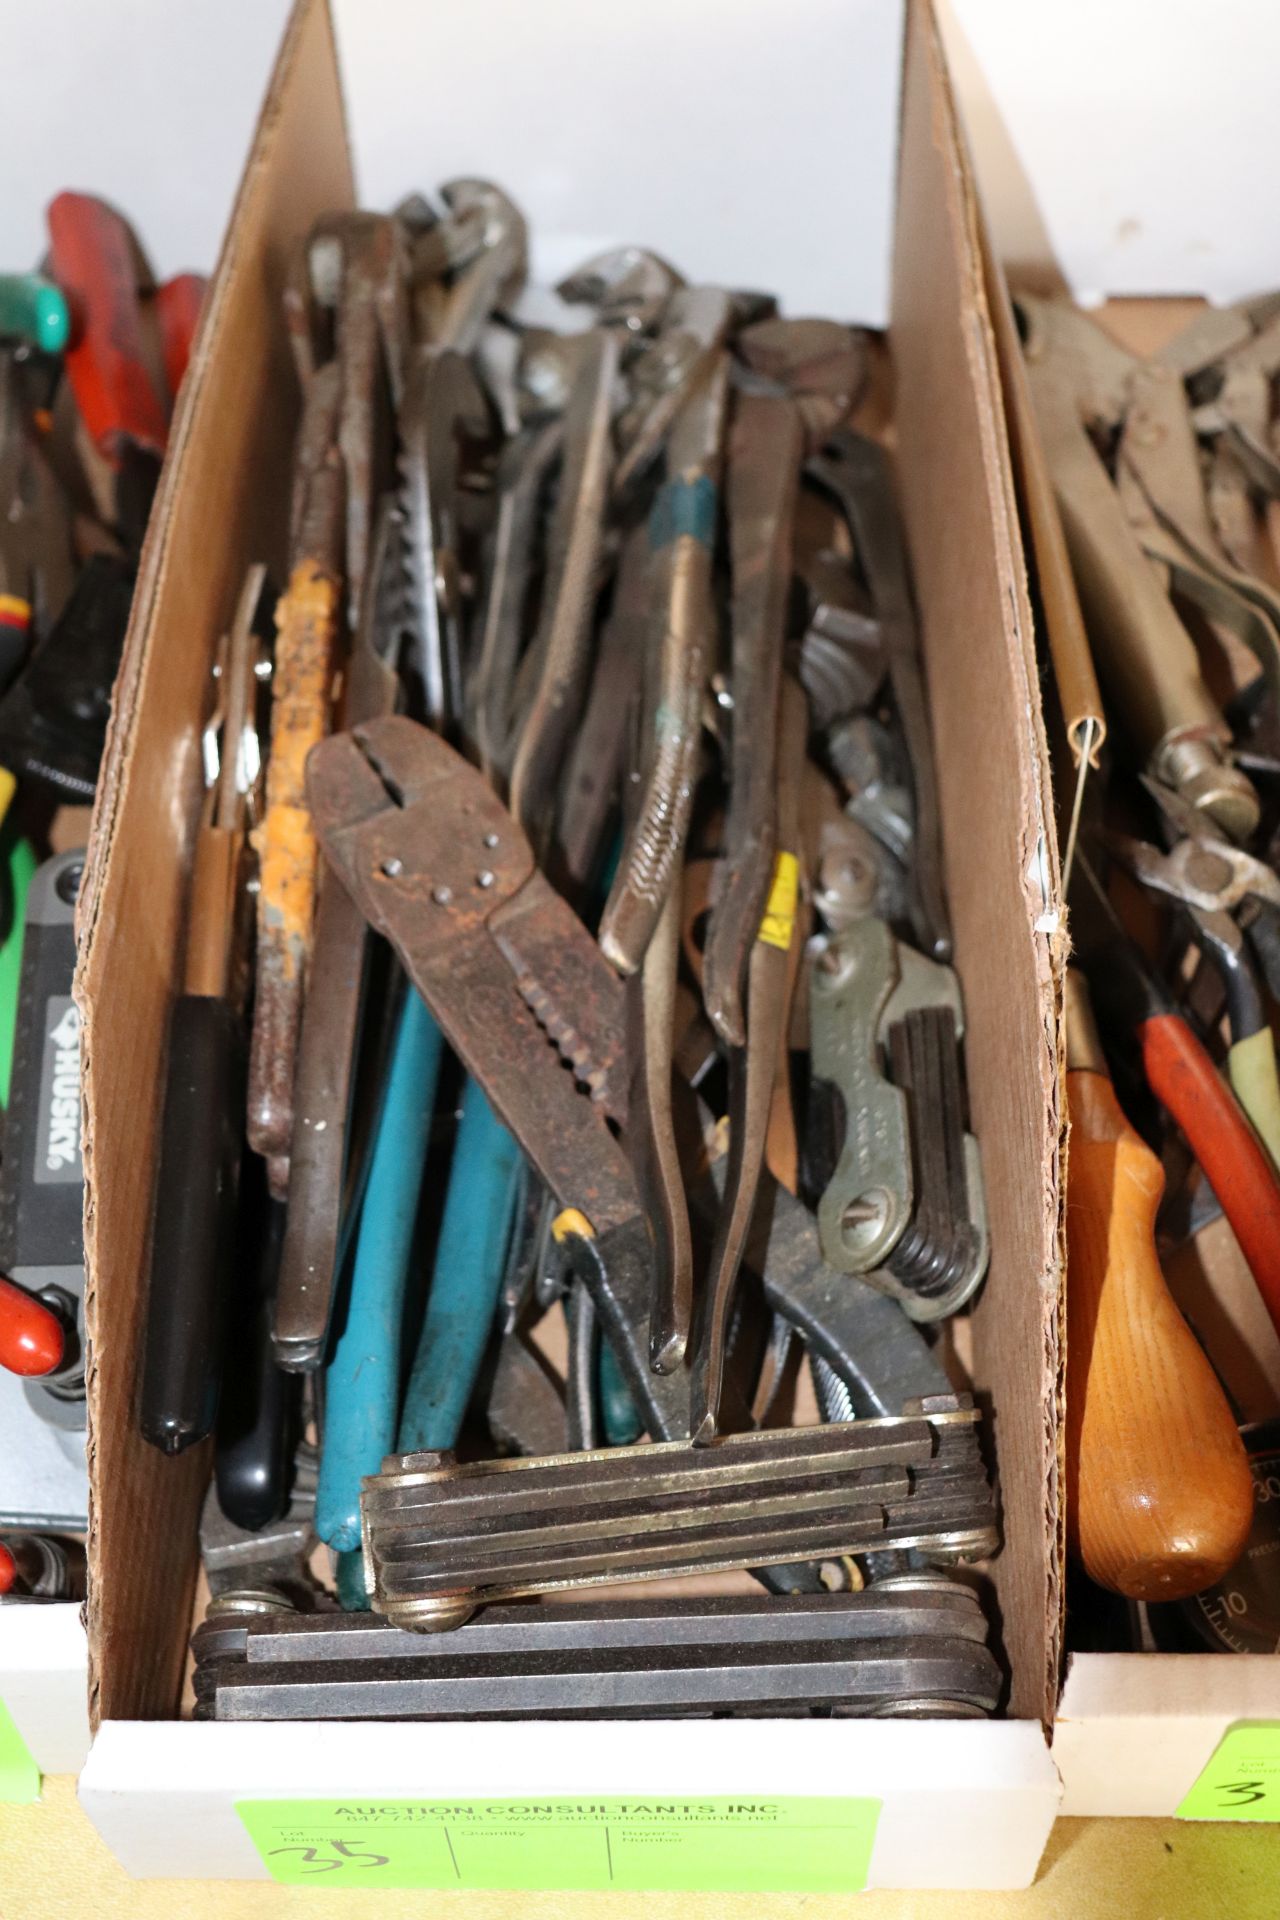 Group of pliers and wire cutters